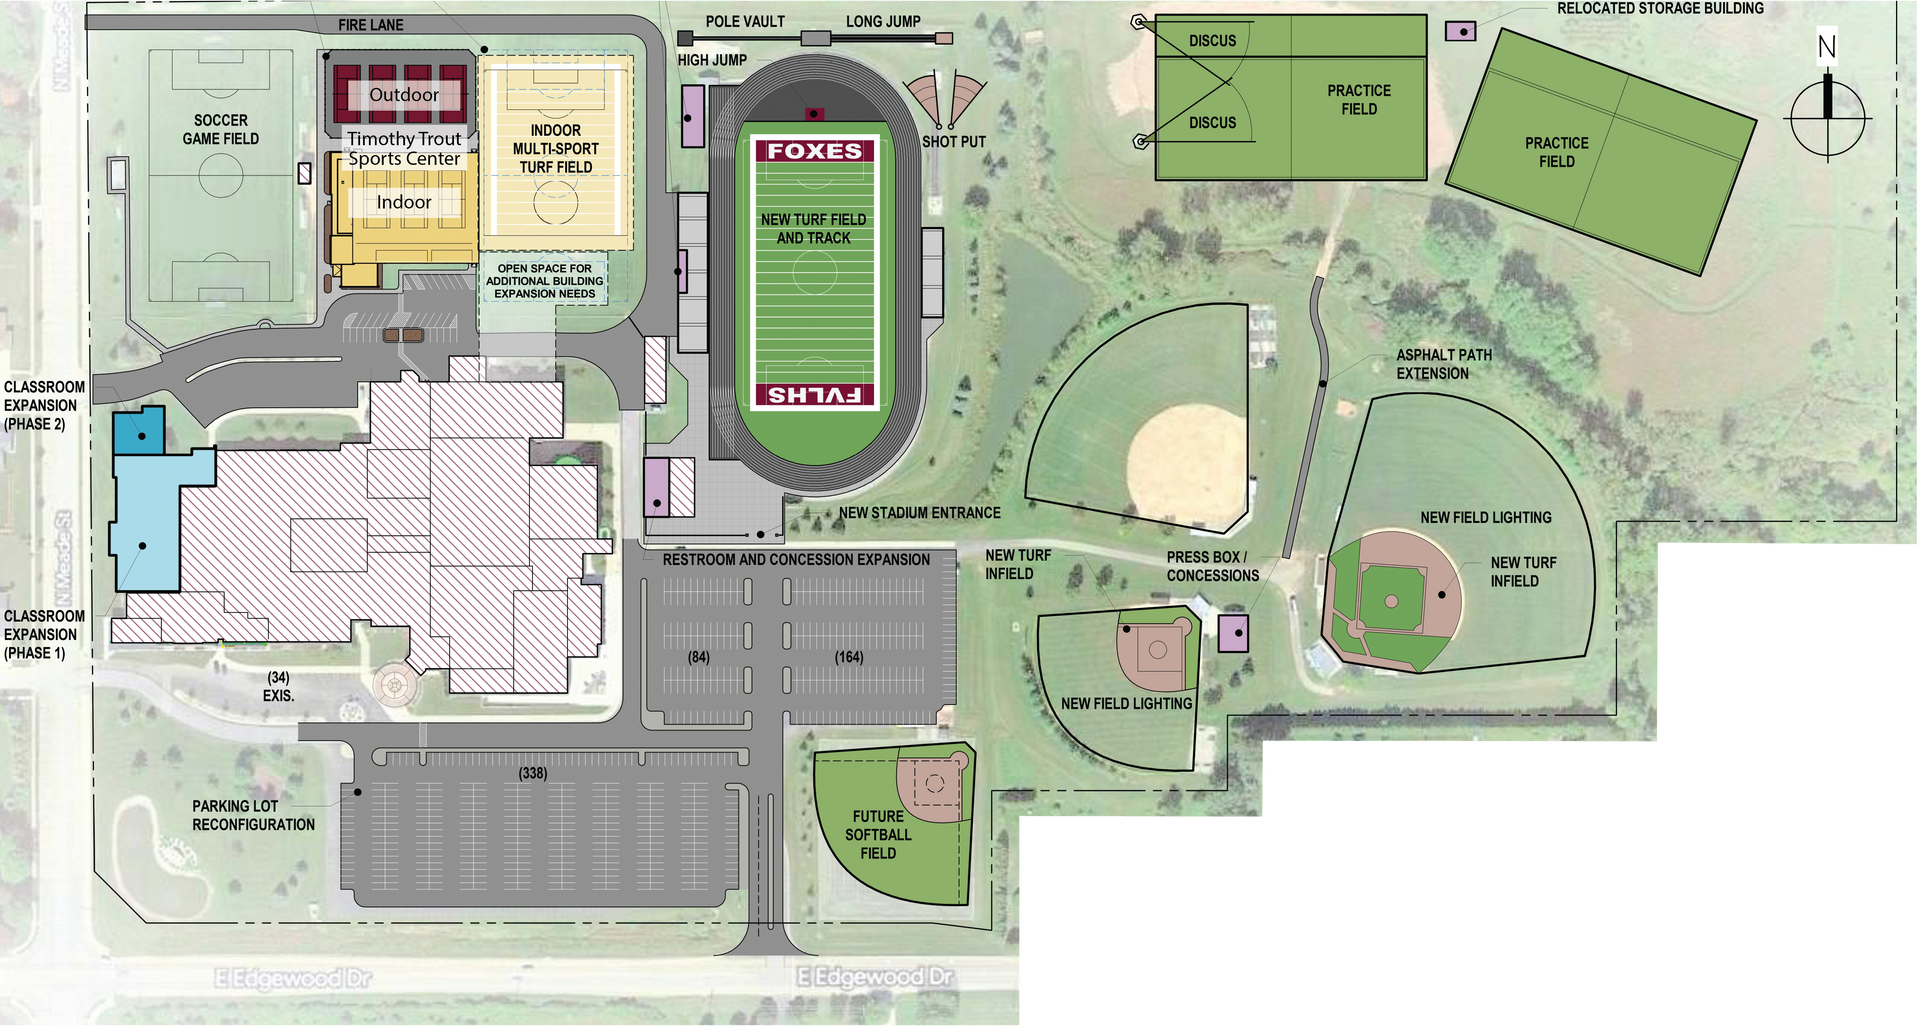 Drawing of the Tentative Site Plan for FVL